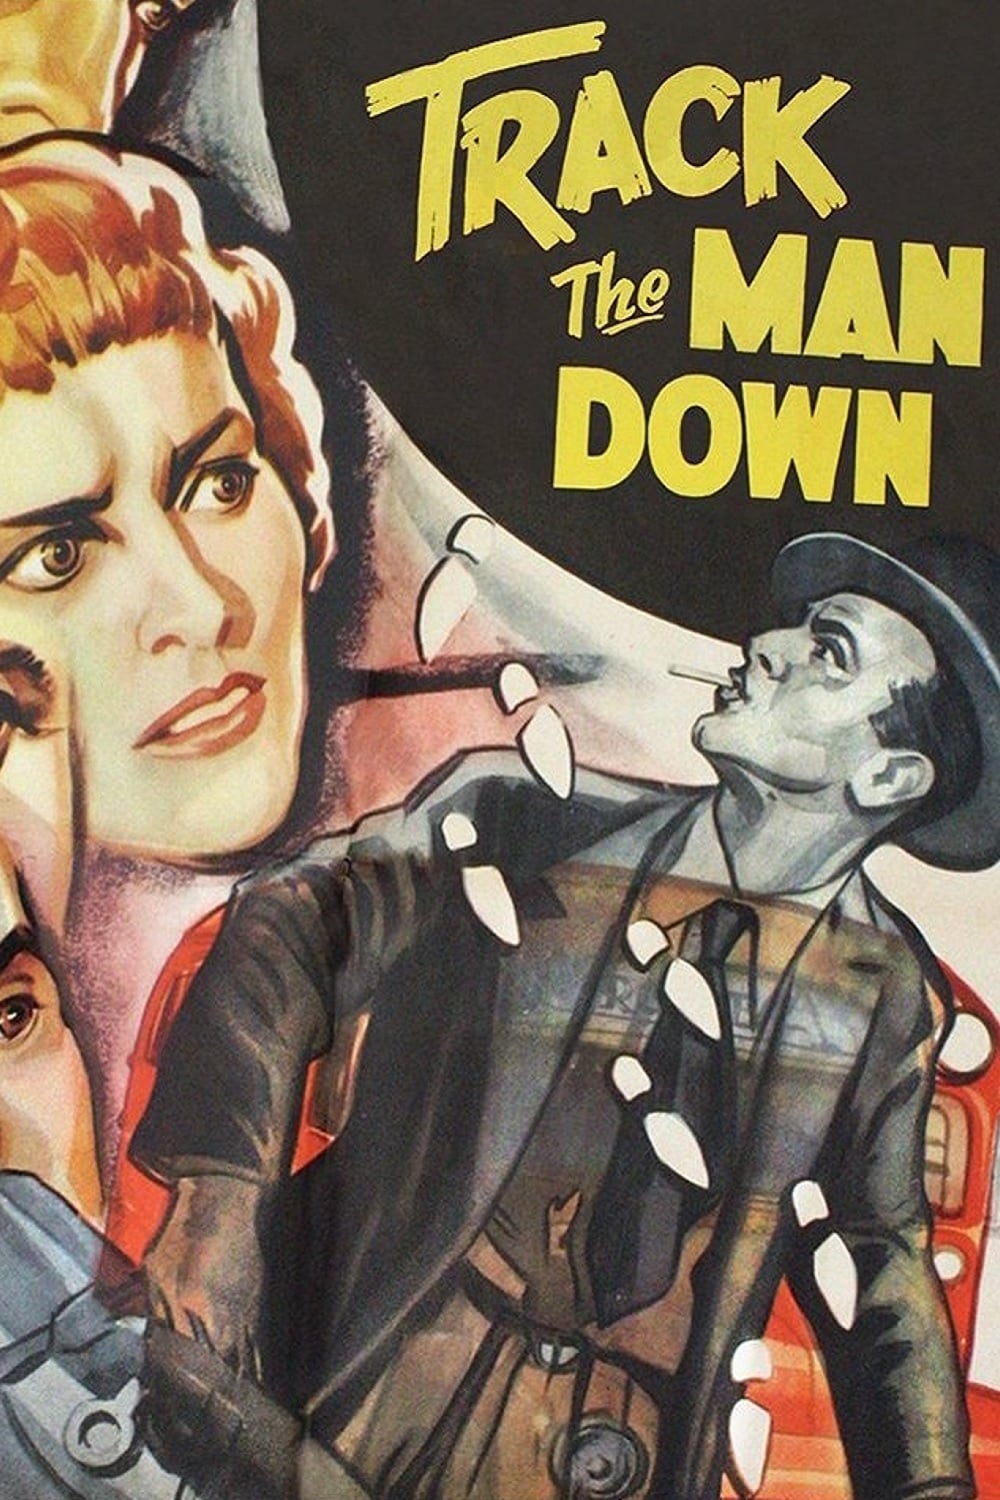 Track the Man Down (1955)